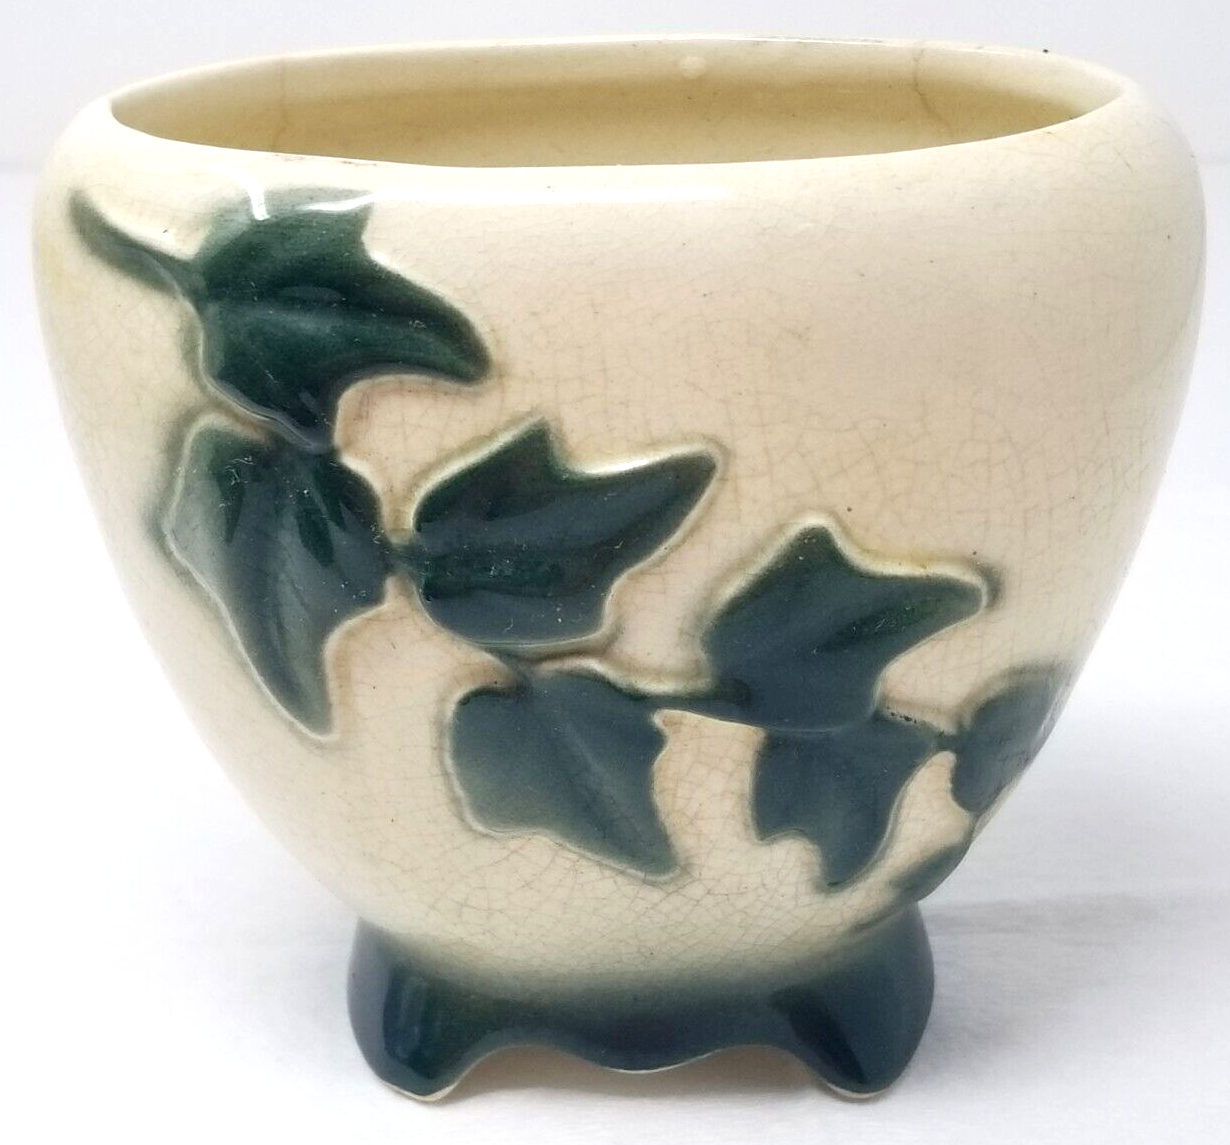 Primary image for Hunter Green Ivy Planter Crackle Glaze Table Small Pedestal Handmade 1960s